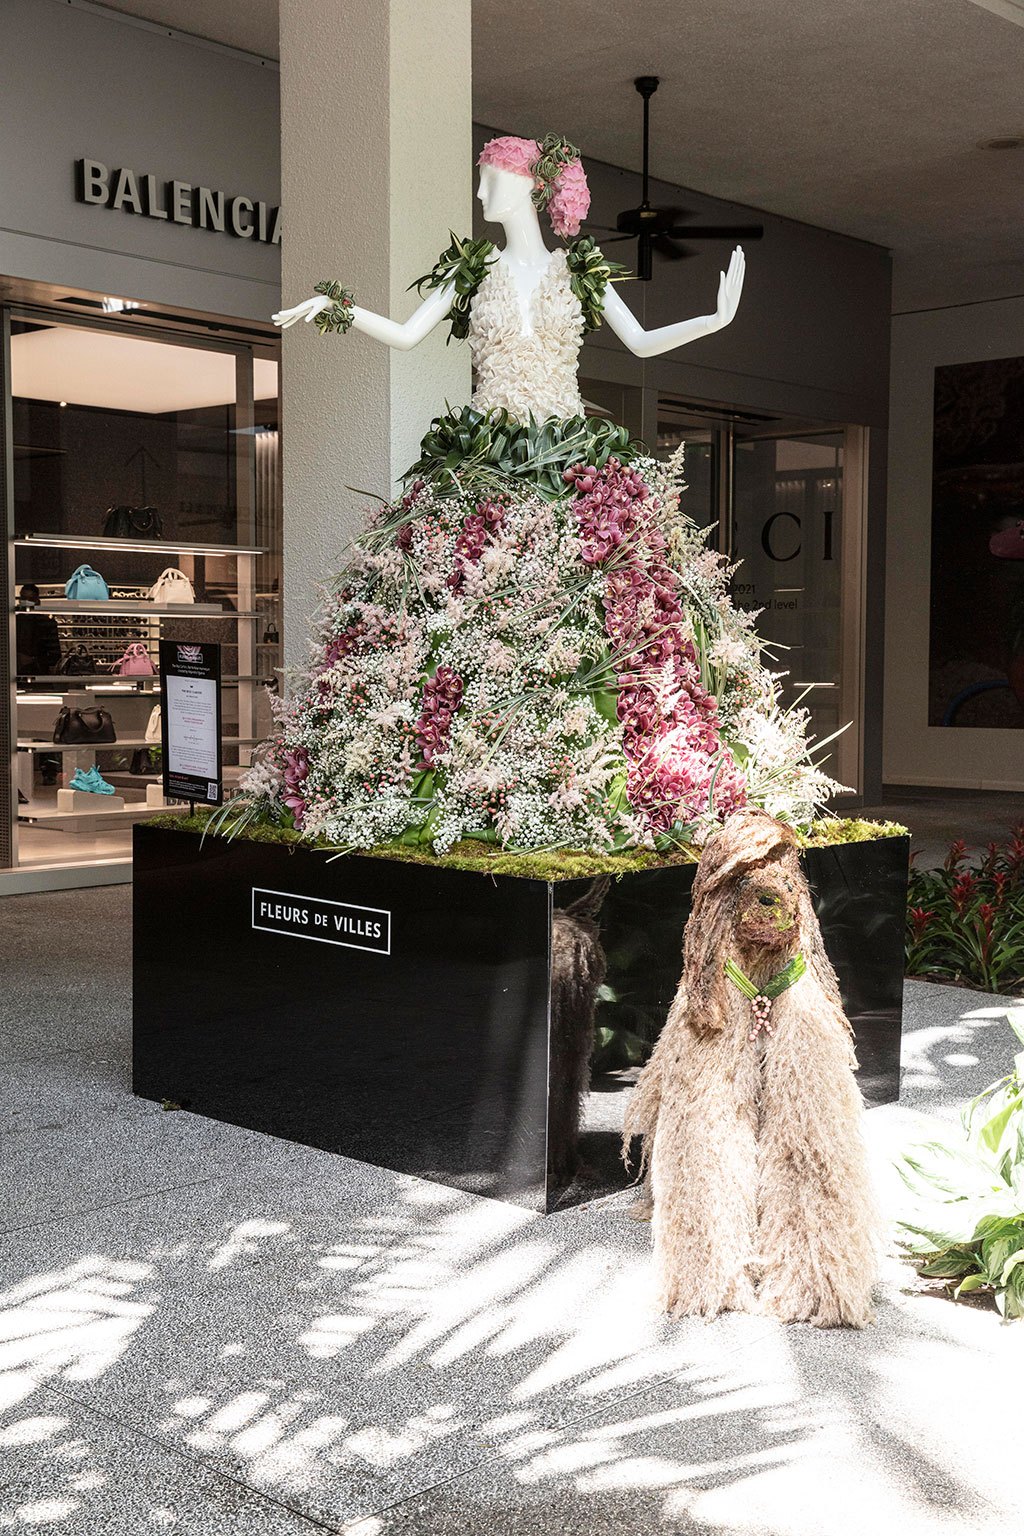 Ritz-Carlton Bal Harbour Mannequin Created by Alejandro Figueira. Photo by Theodora Richter